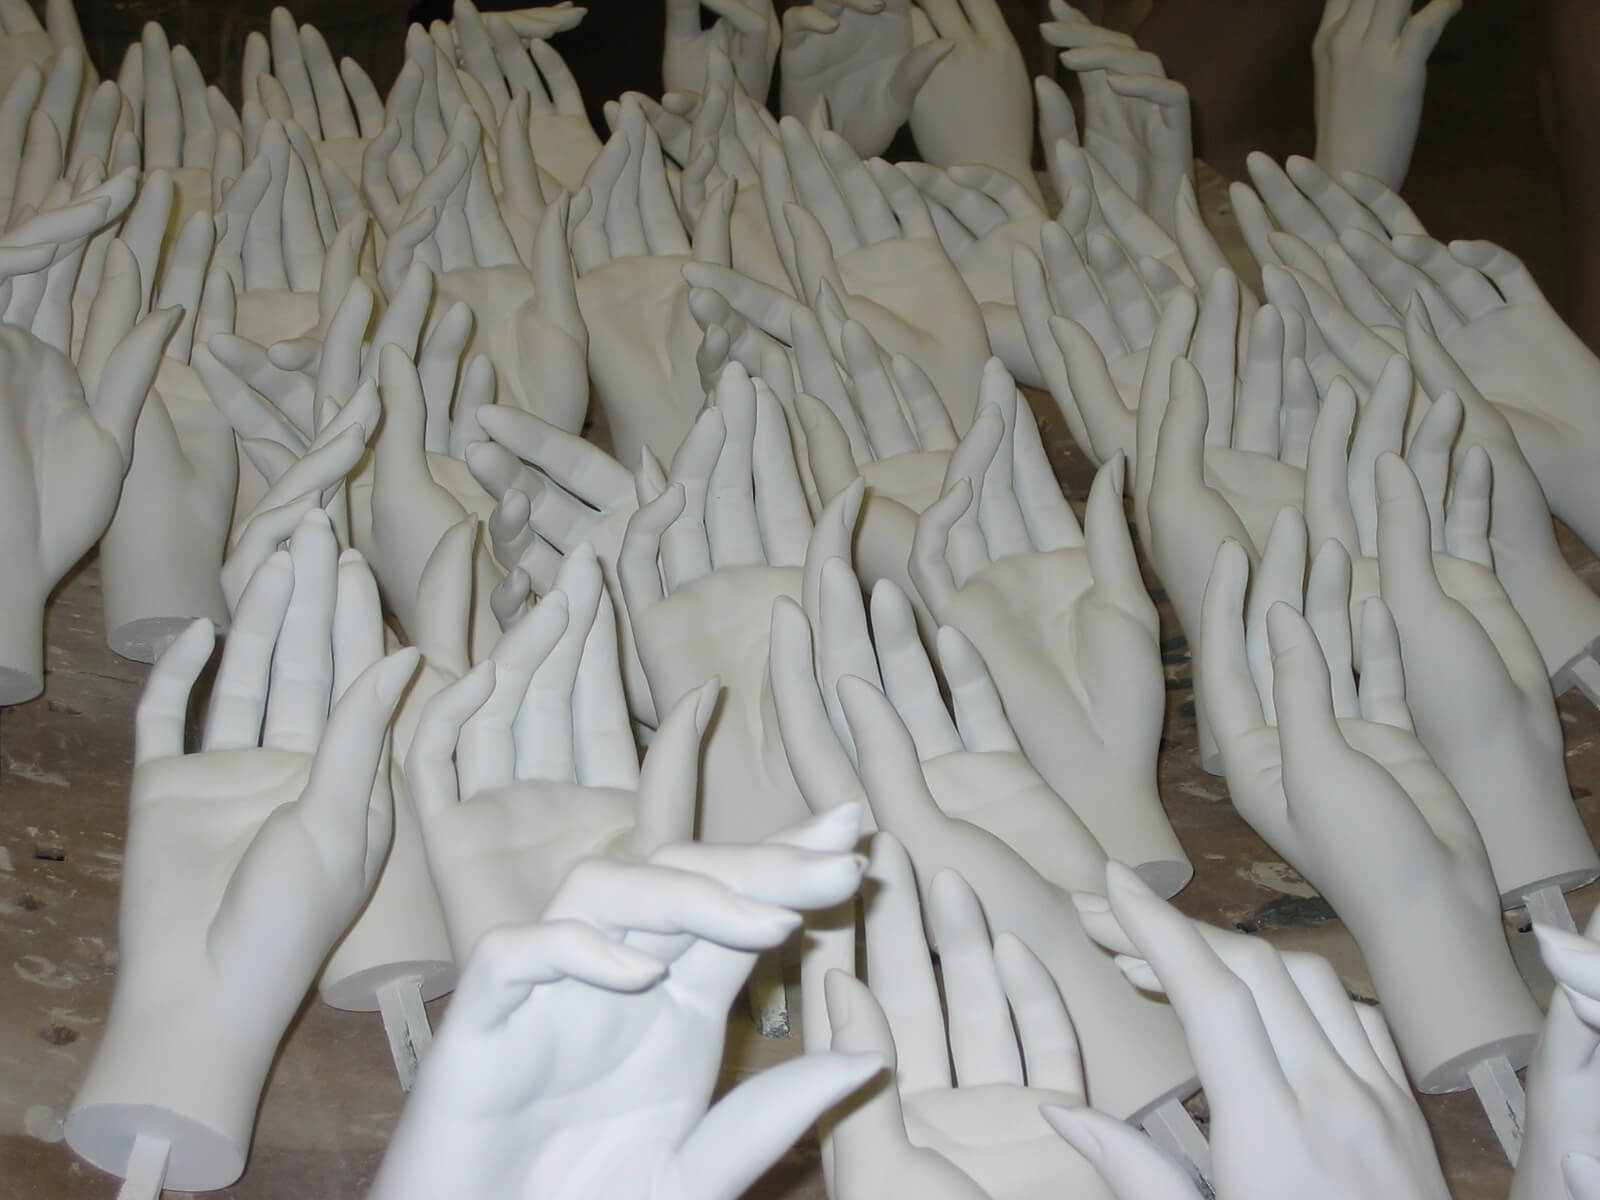 Mannequins hands with no painting, they are all white.